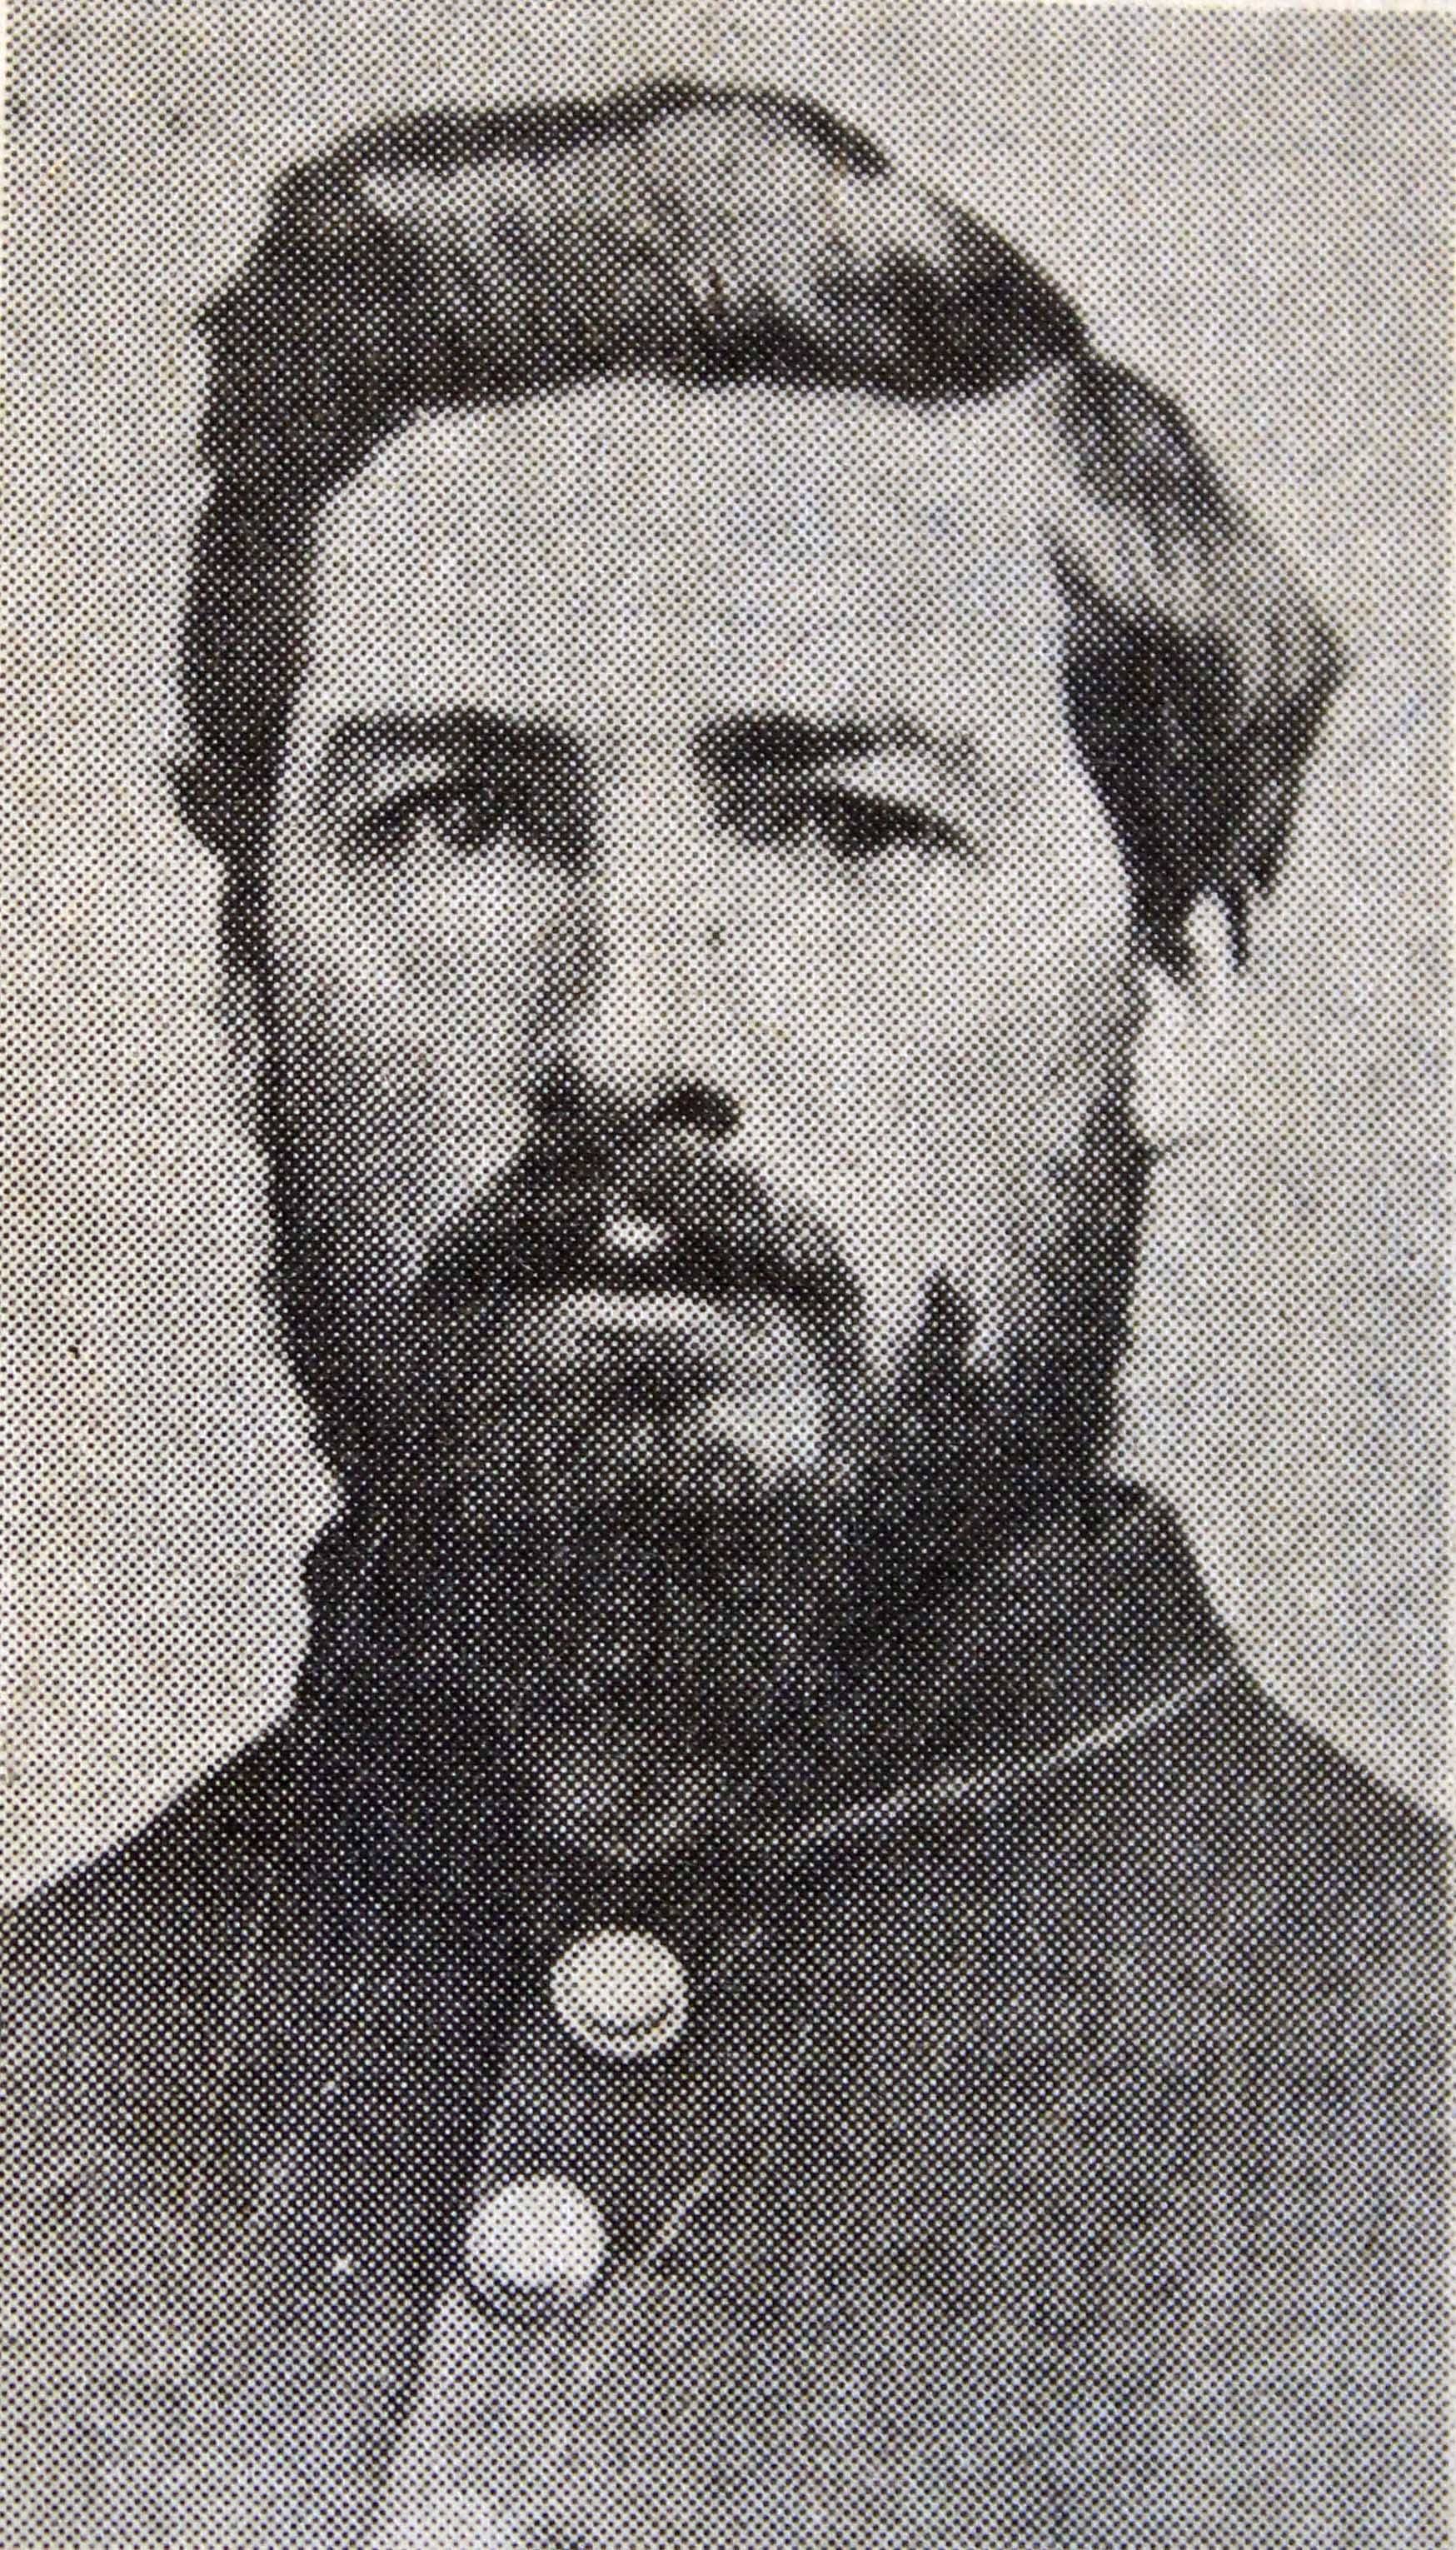 Theodore Hill Jr. fought in several of the Civil War’s most famous battles, surviving to eventually settle down in the Buckley area.